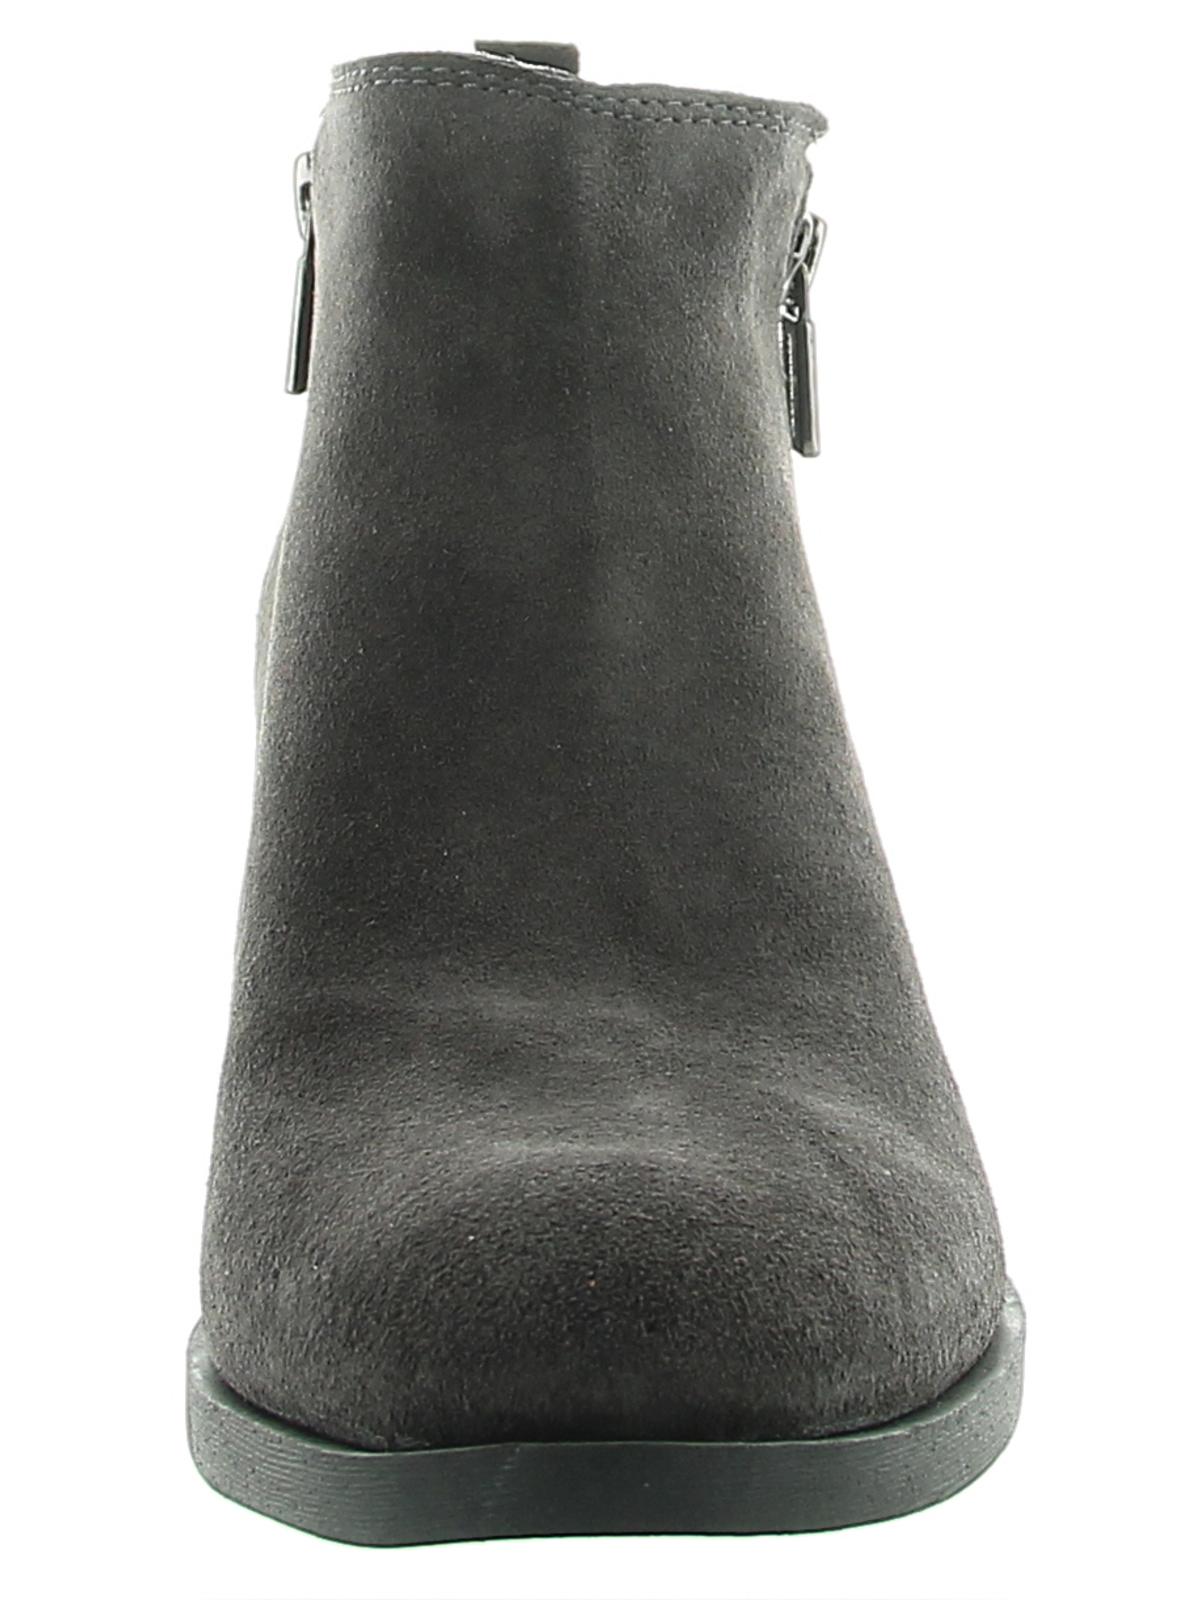 Kenneth Cole New York Womens Dara Booties